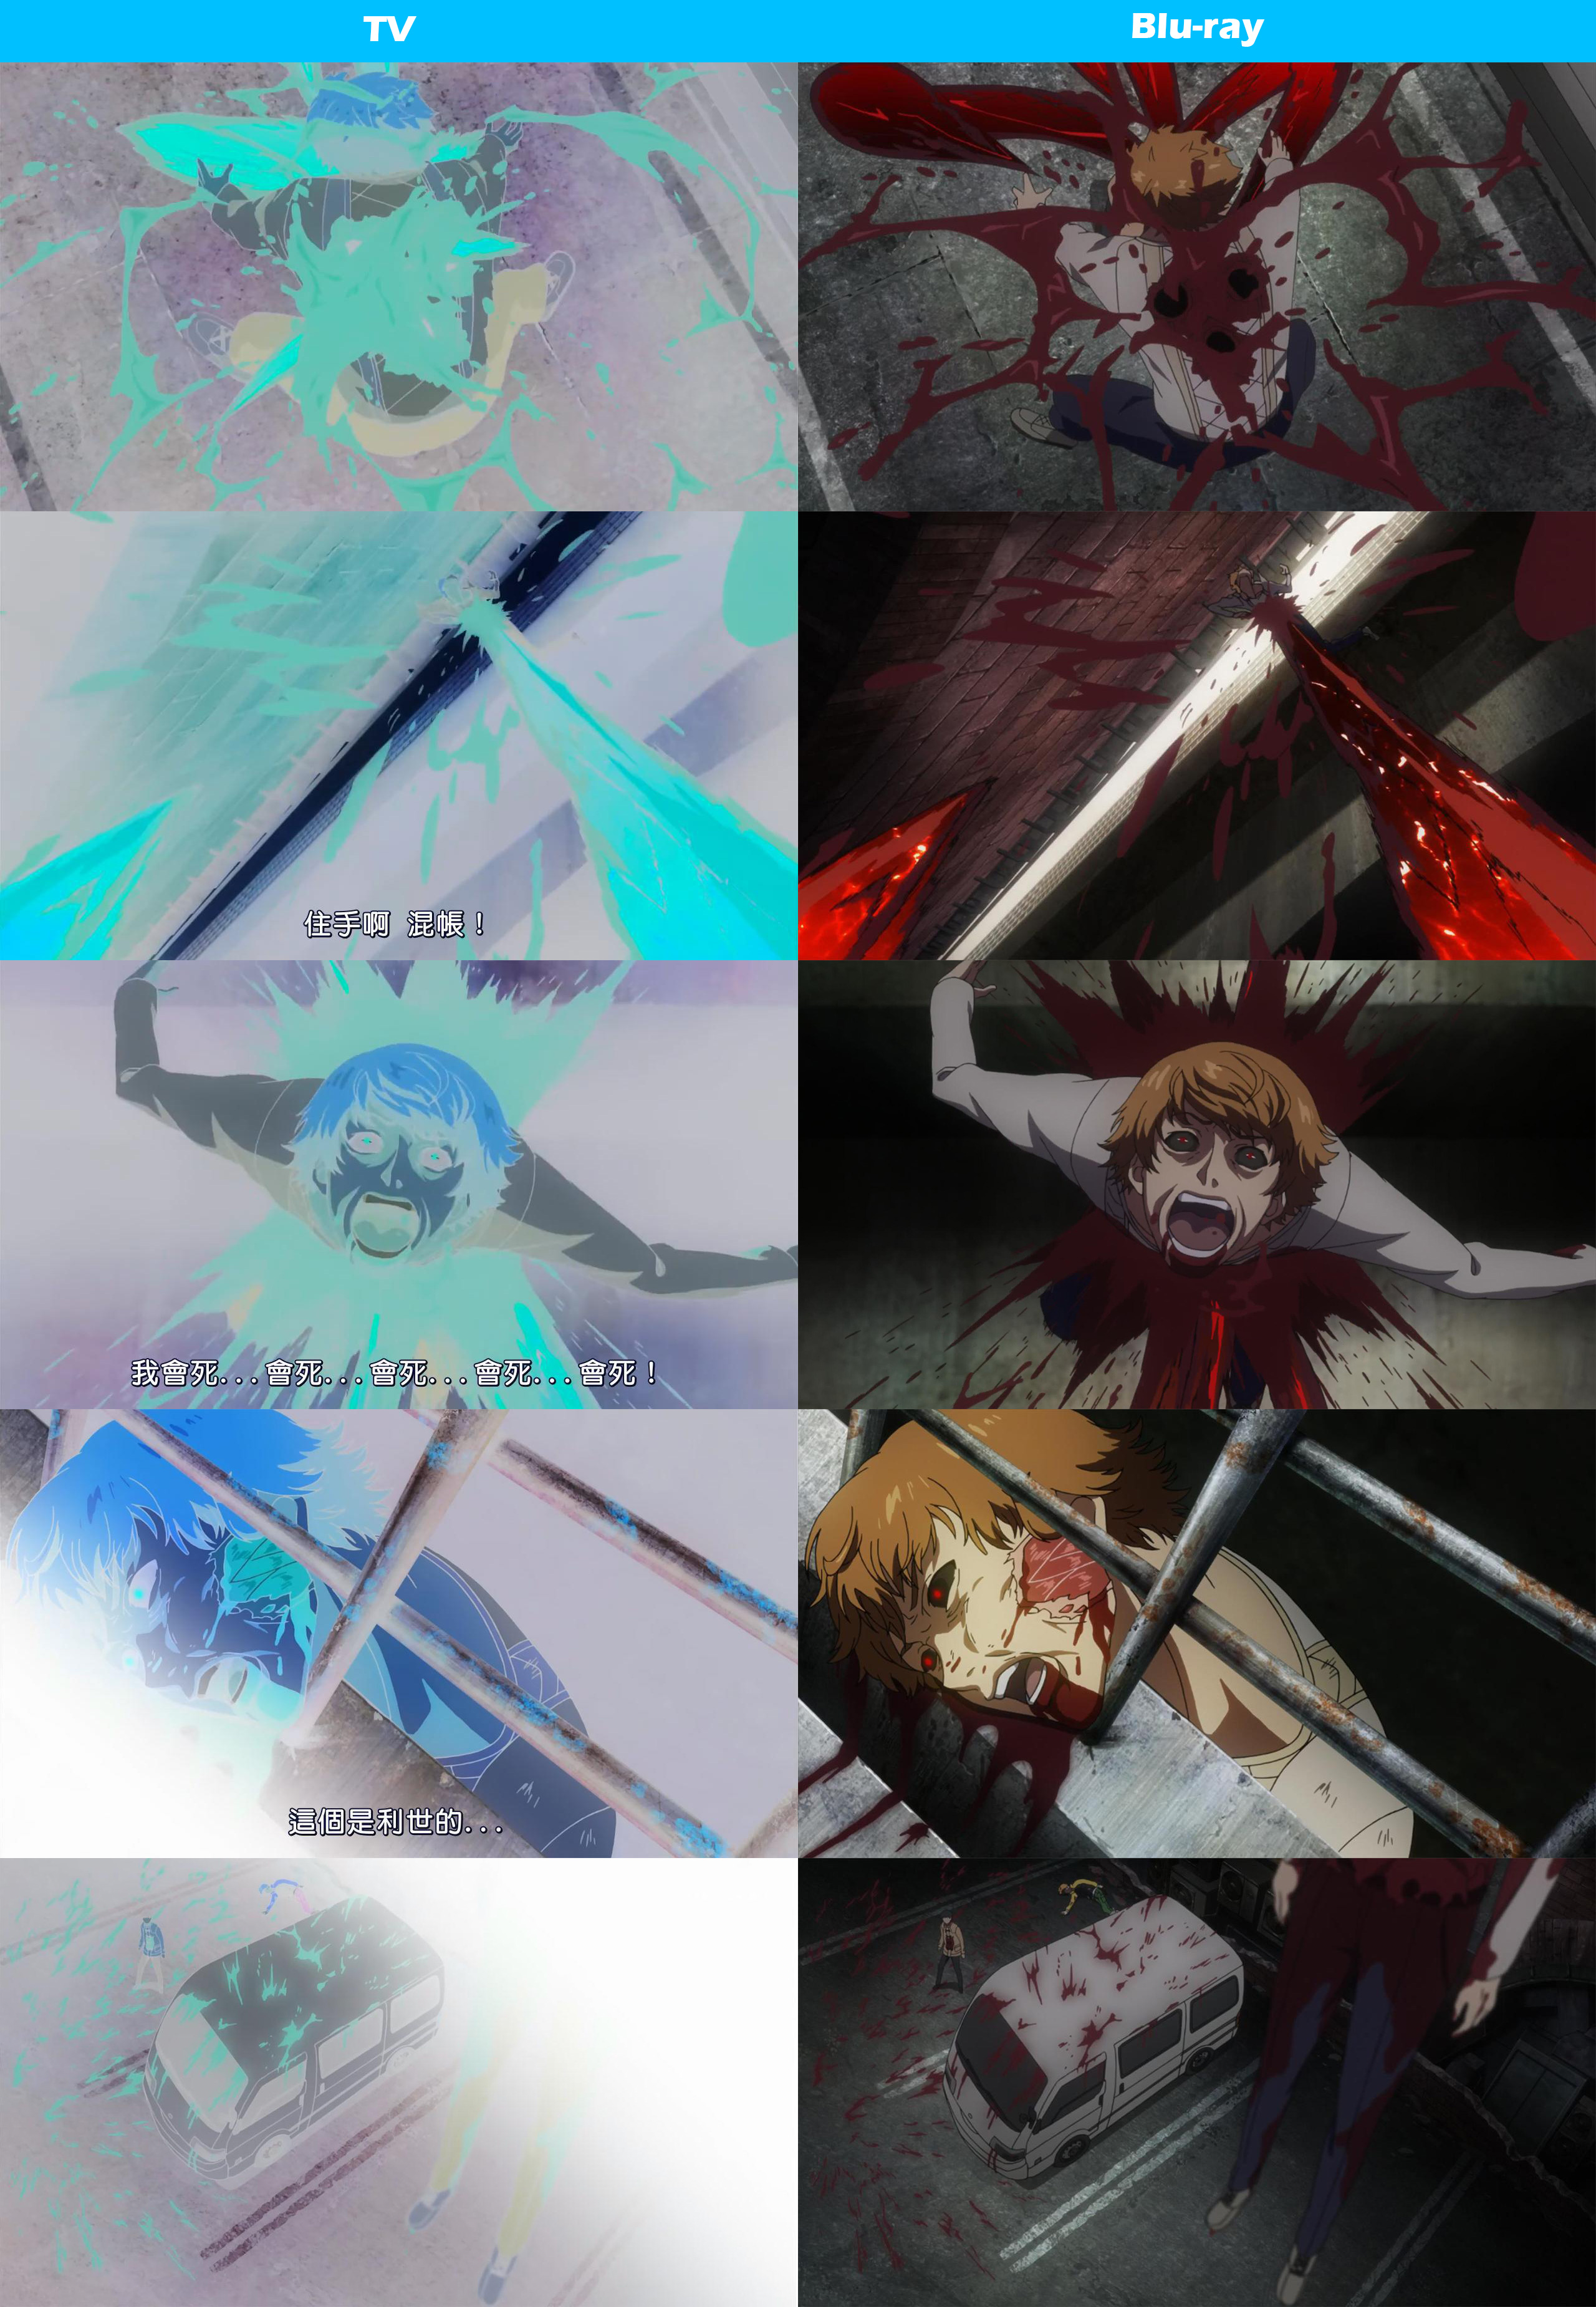 Tokyo-Ghoul---TV-and-Blu-ray-Comparison-Image-4